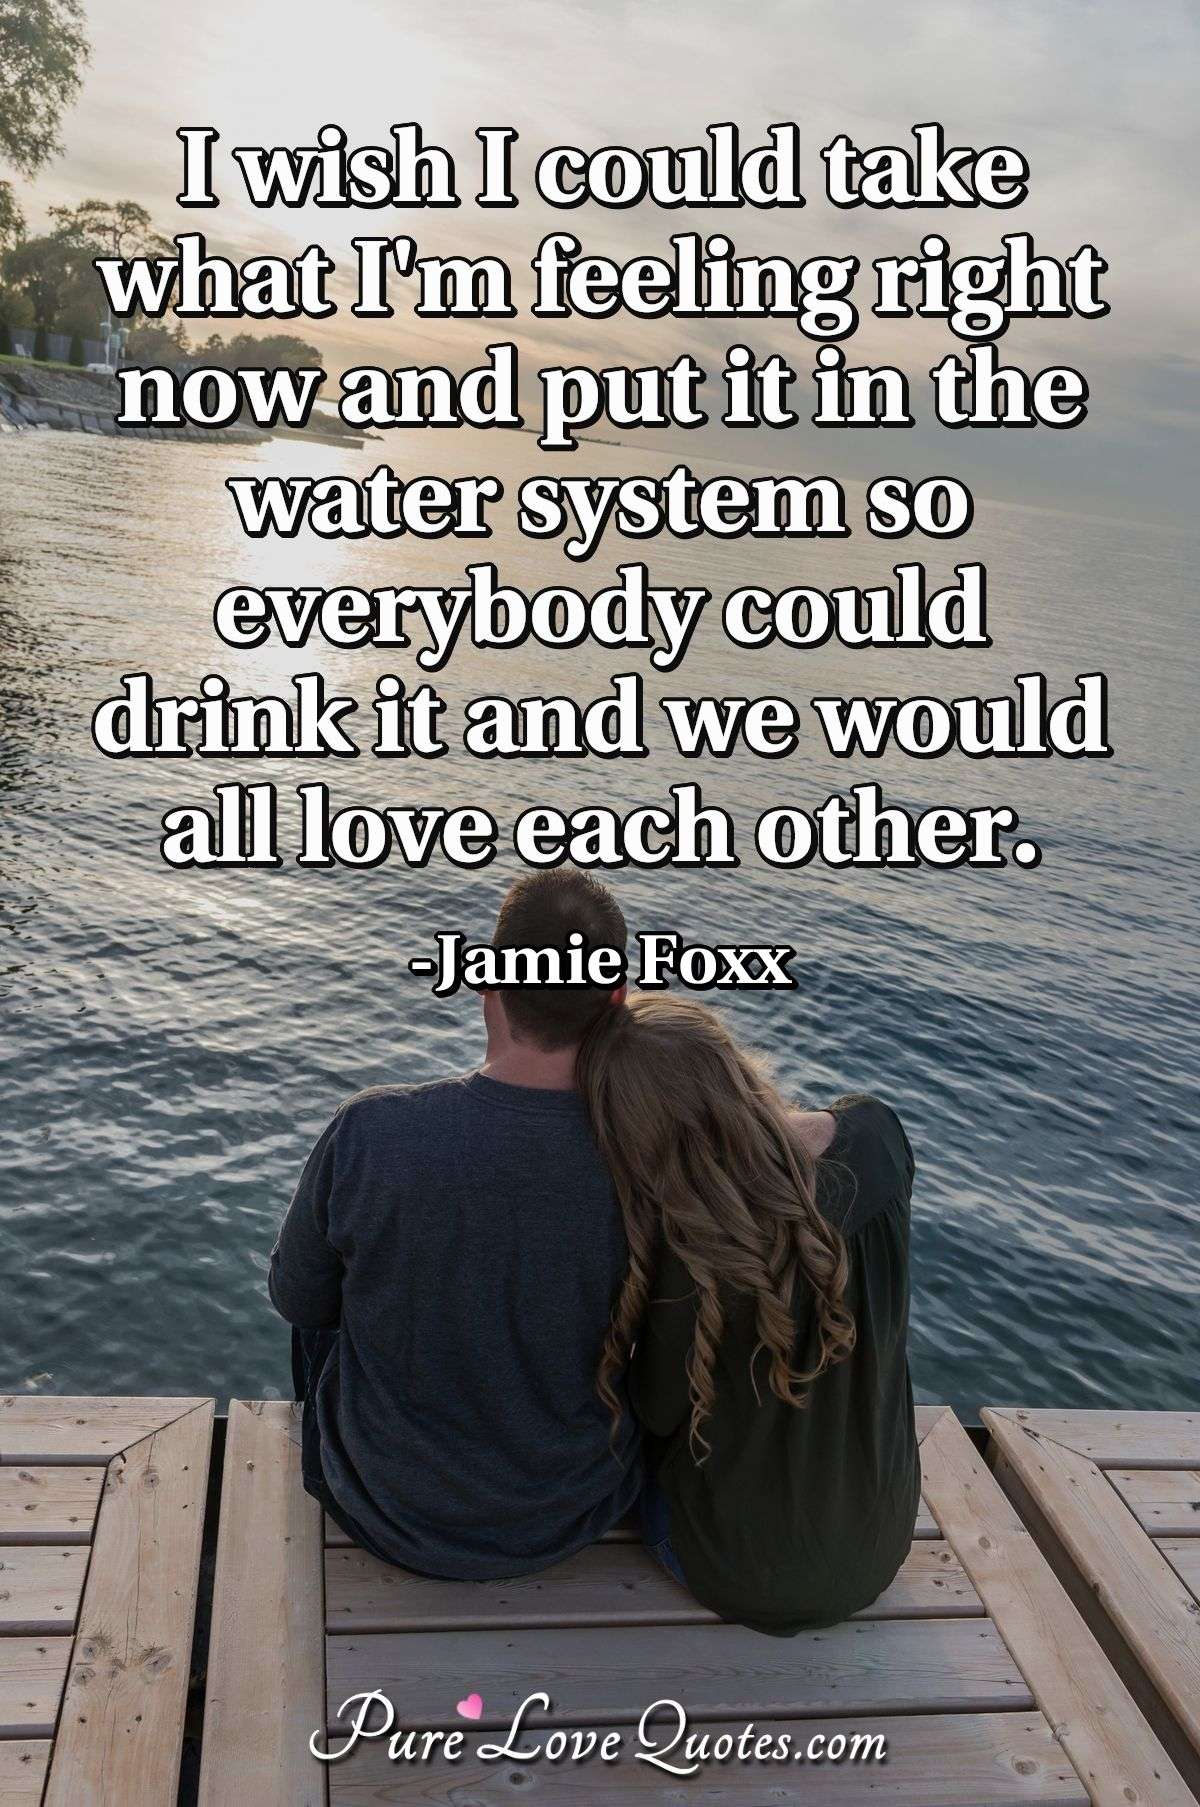 I wish I could take what I'm feeling right now and put it in the water system so everybody could drink it and we would all love each other. - Jamie Foxx